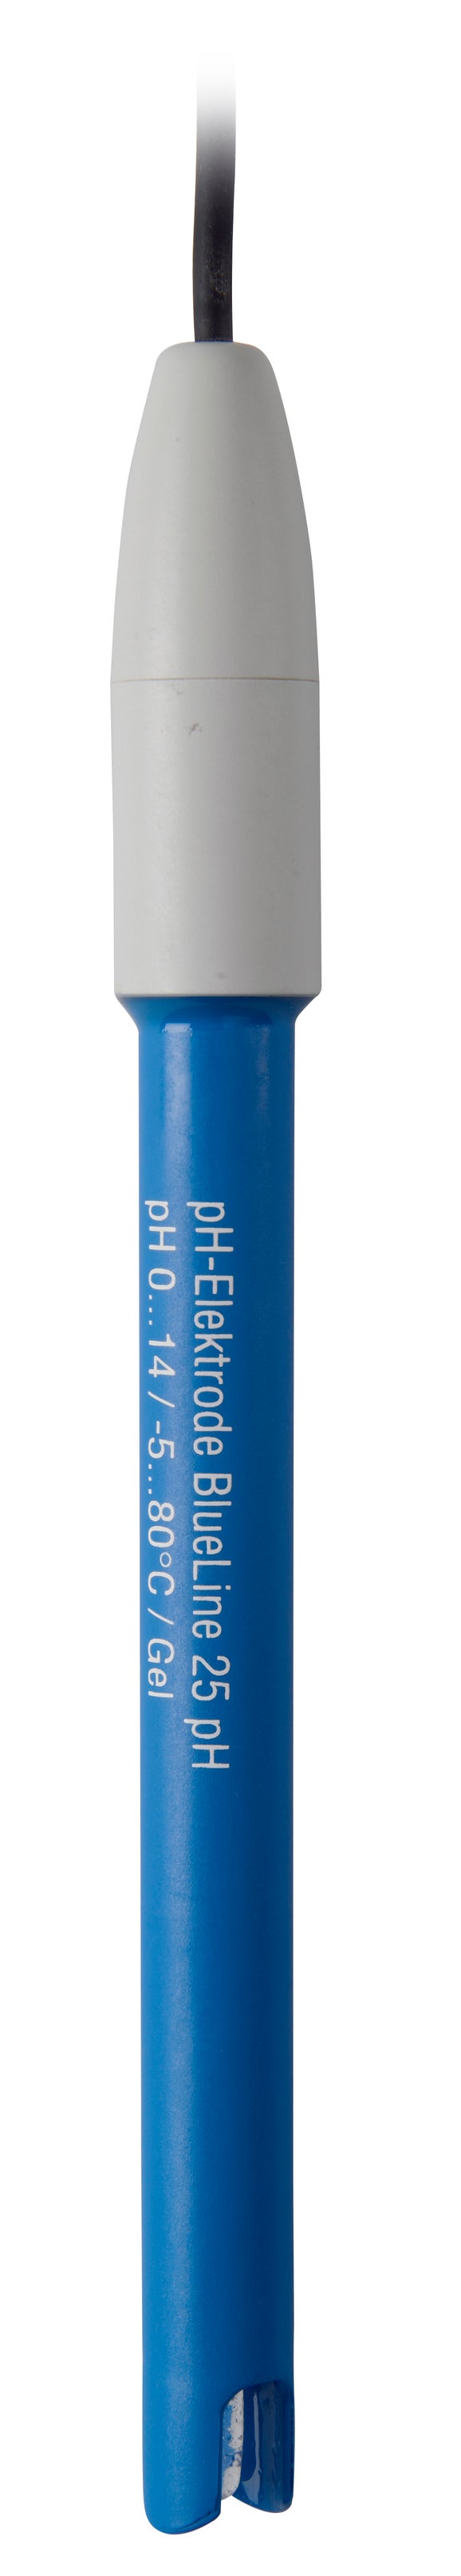 Electrode, pH Combination, 30"